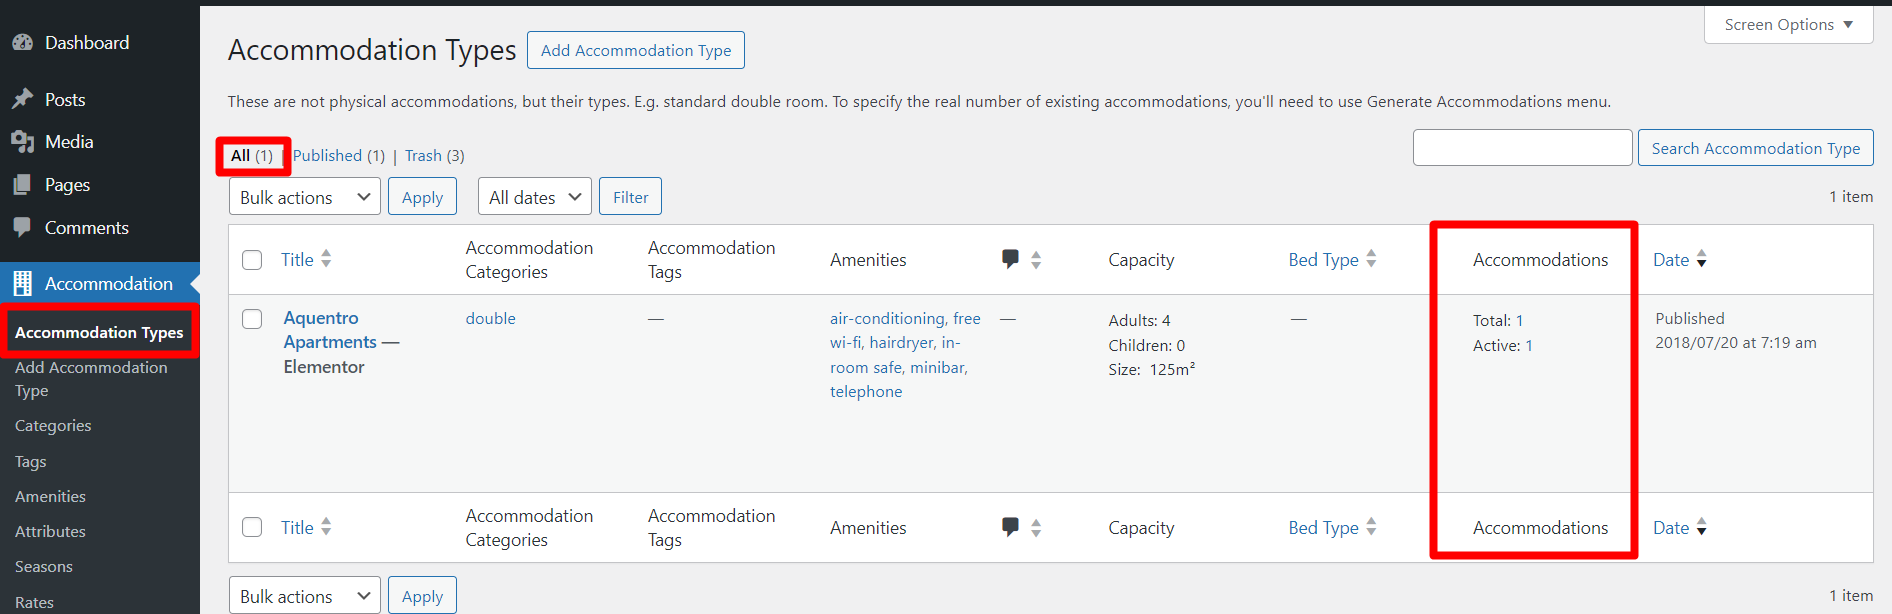 list-of-accommodation-types.png